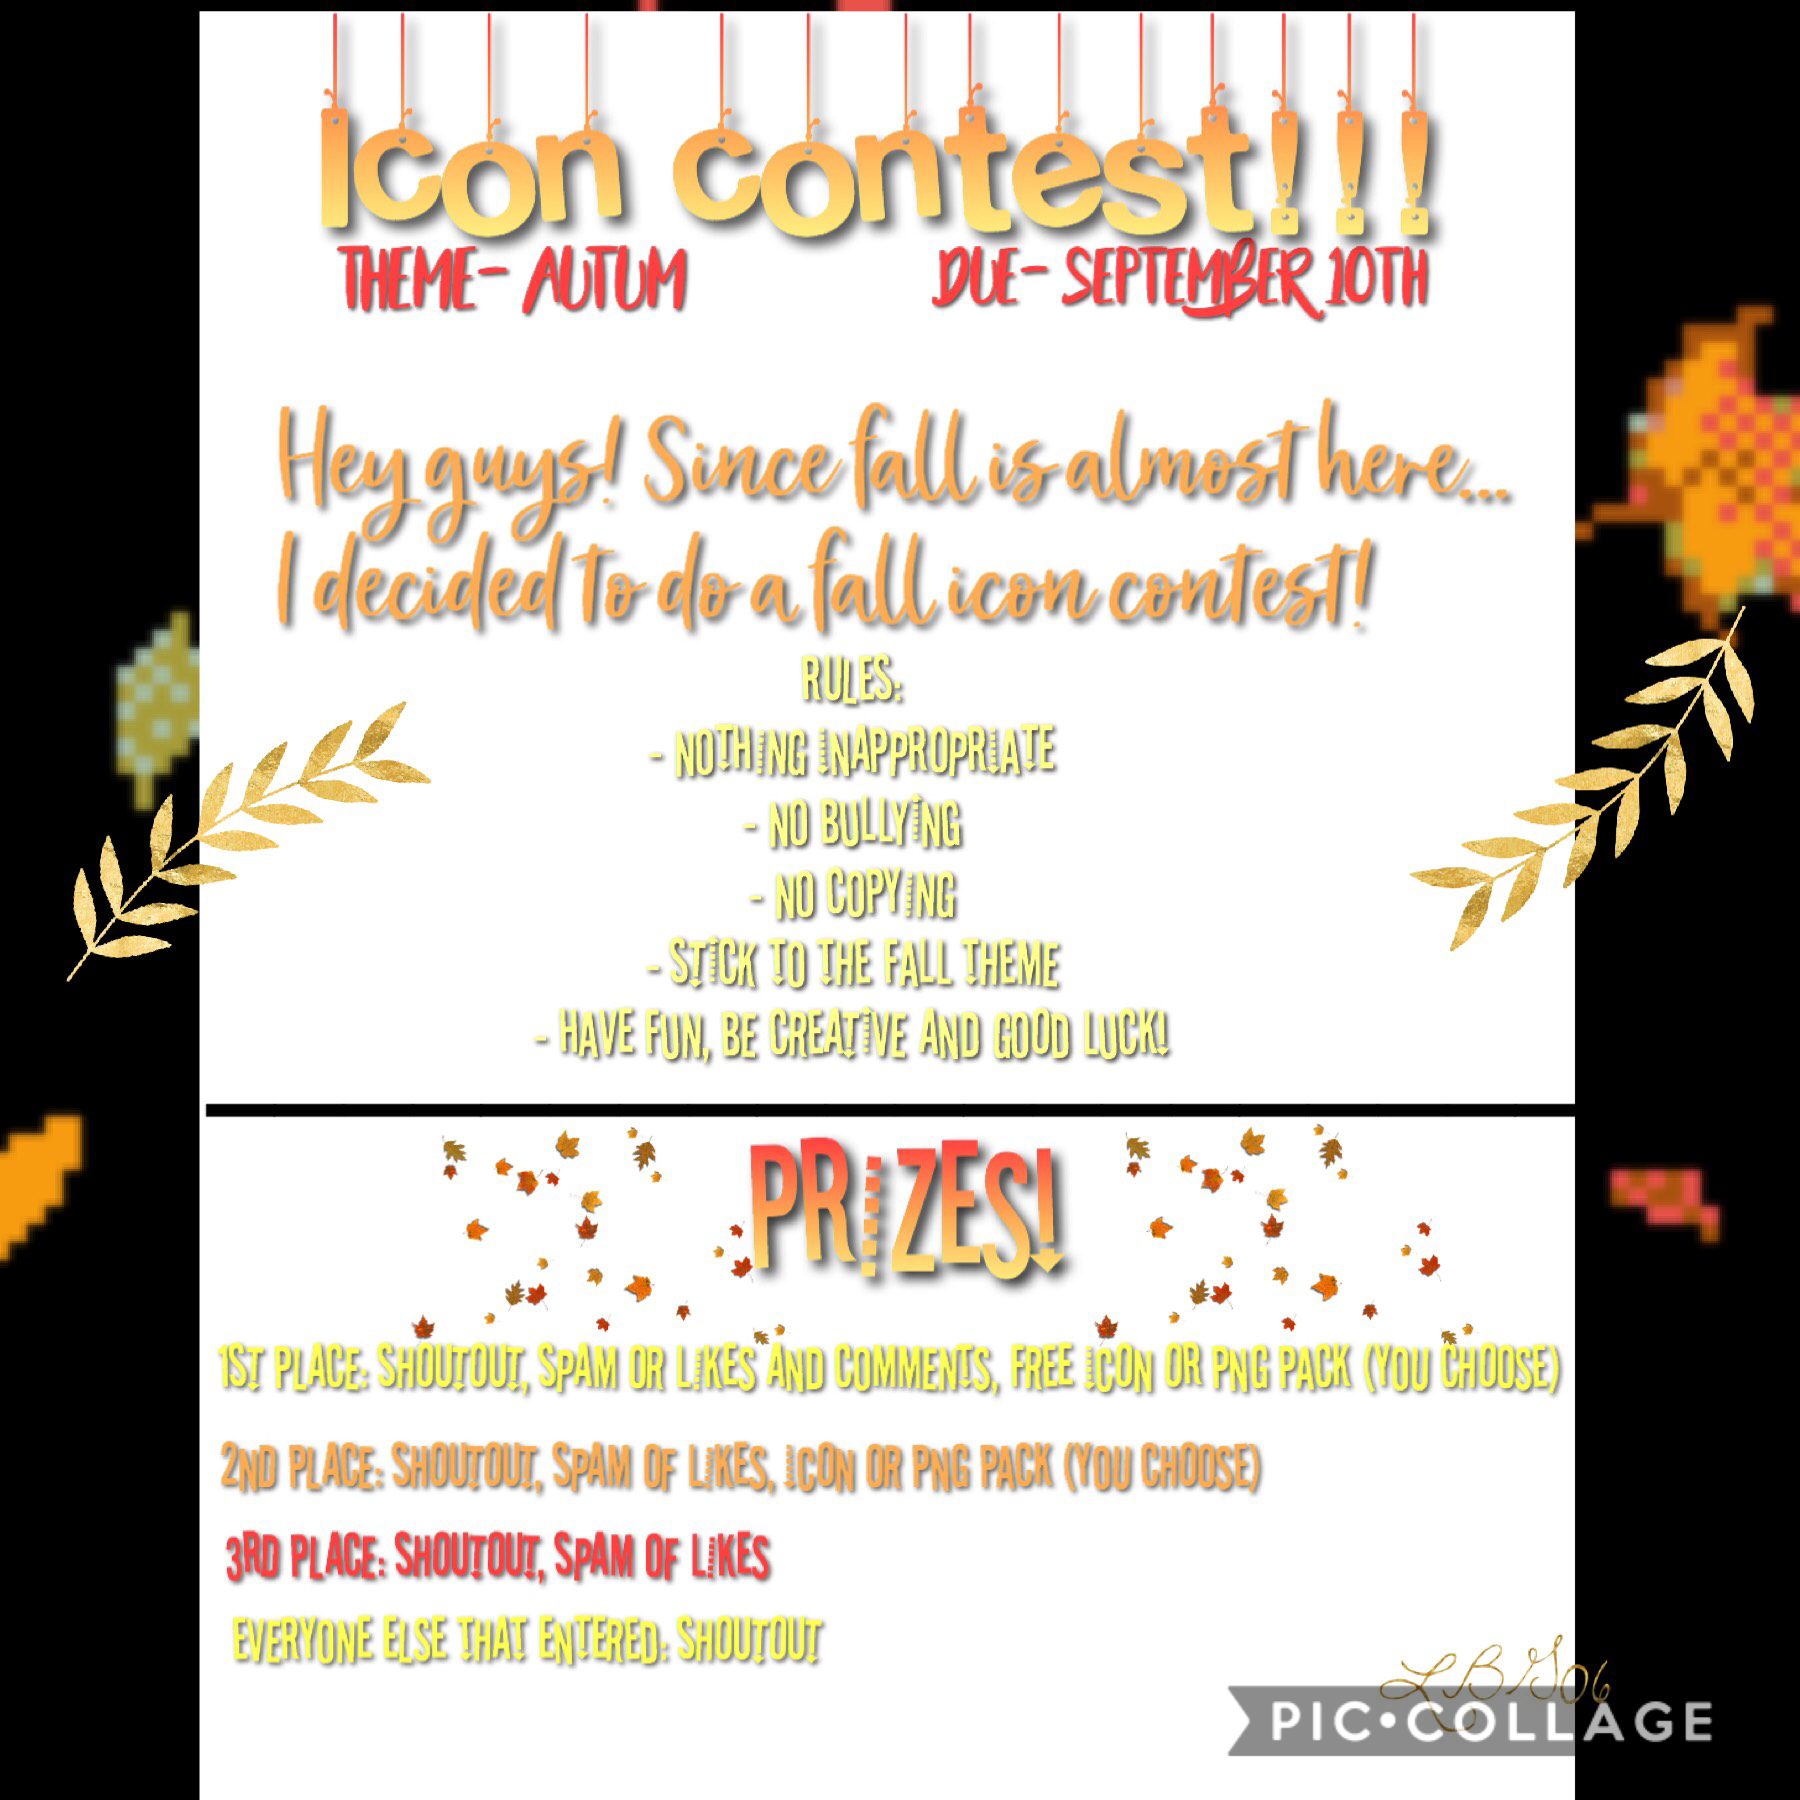 🍂Tap🍁

FALL ICON CONTEST!!! 🍁🍁🍂🍂
Due September 10th

I can’t believe summer is almost over 🙁

QOTD: are you excited for fall?
AOTD: NOPE!

Have fun! Xoxo 🍁❤️